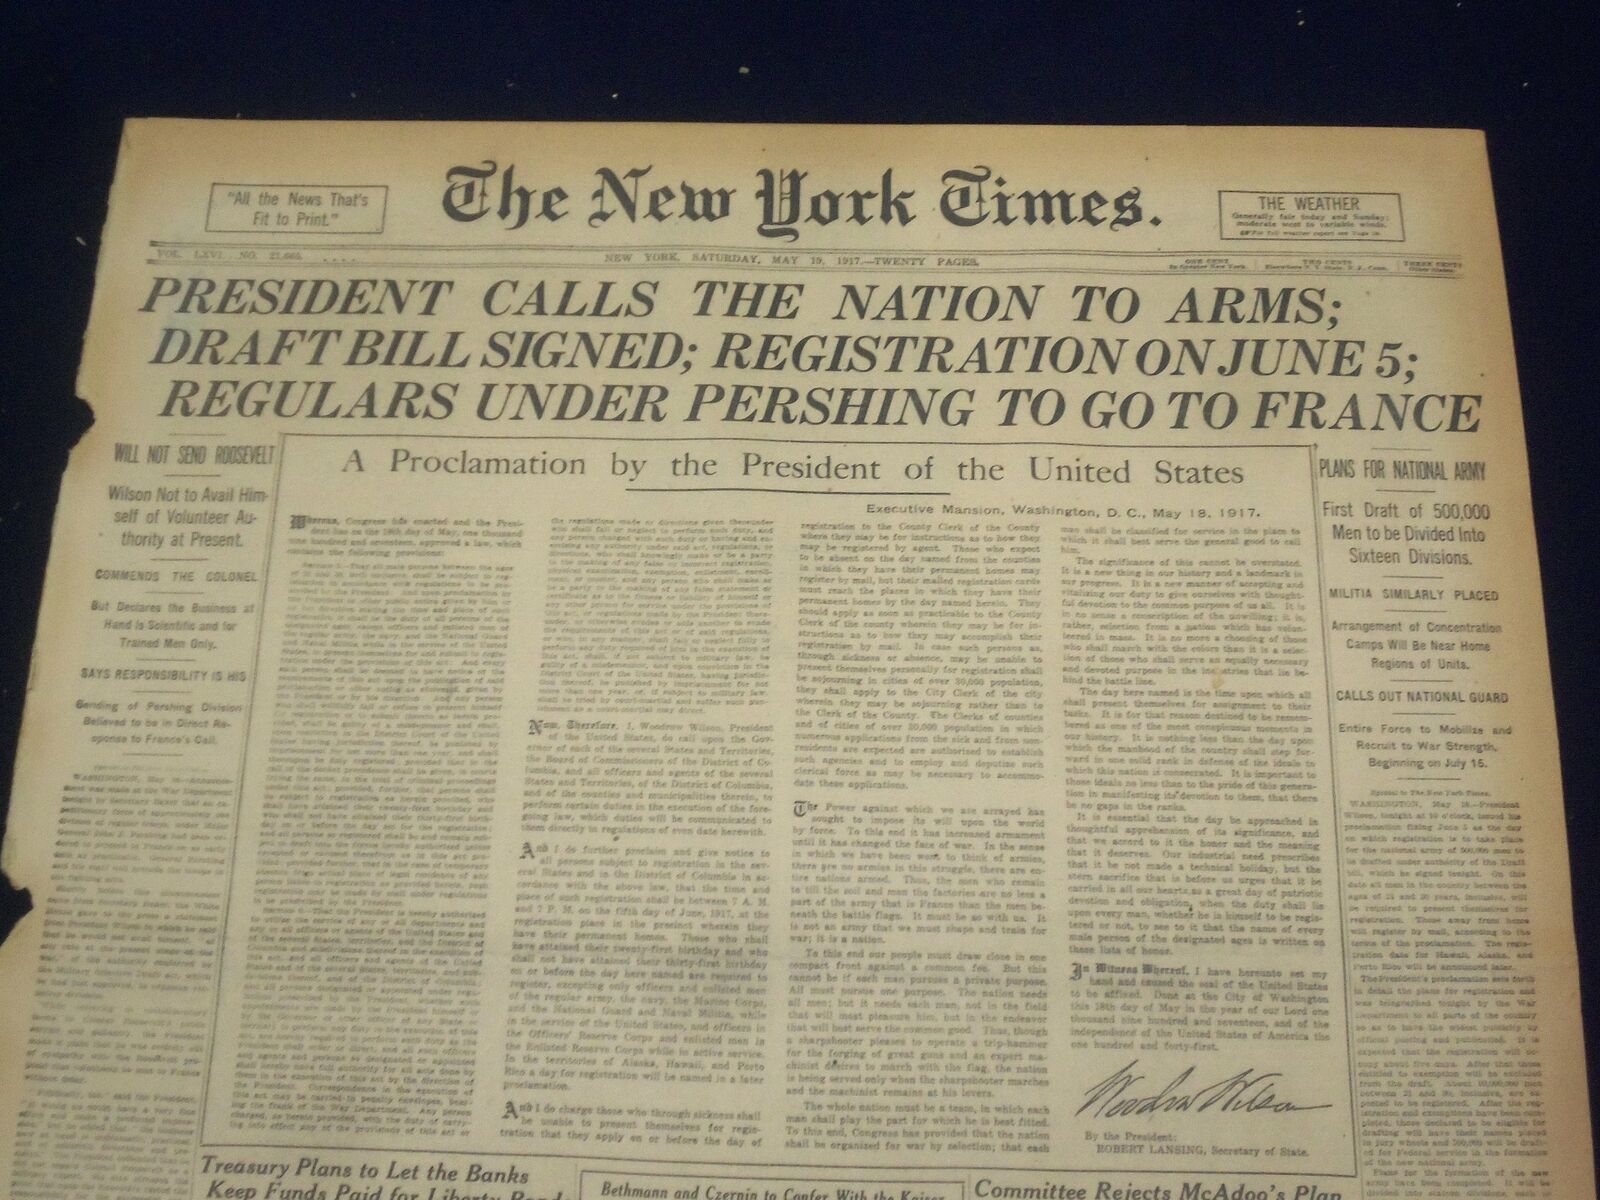 1917 MAY 19 NEW YORK TIMES - PRESIDENT CALLS THE NATION TO ARMS - NT 9154